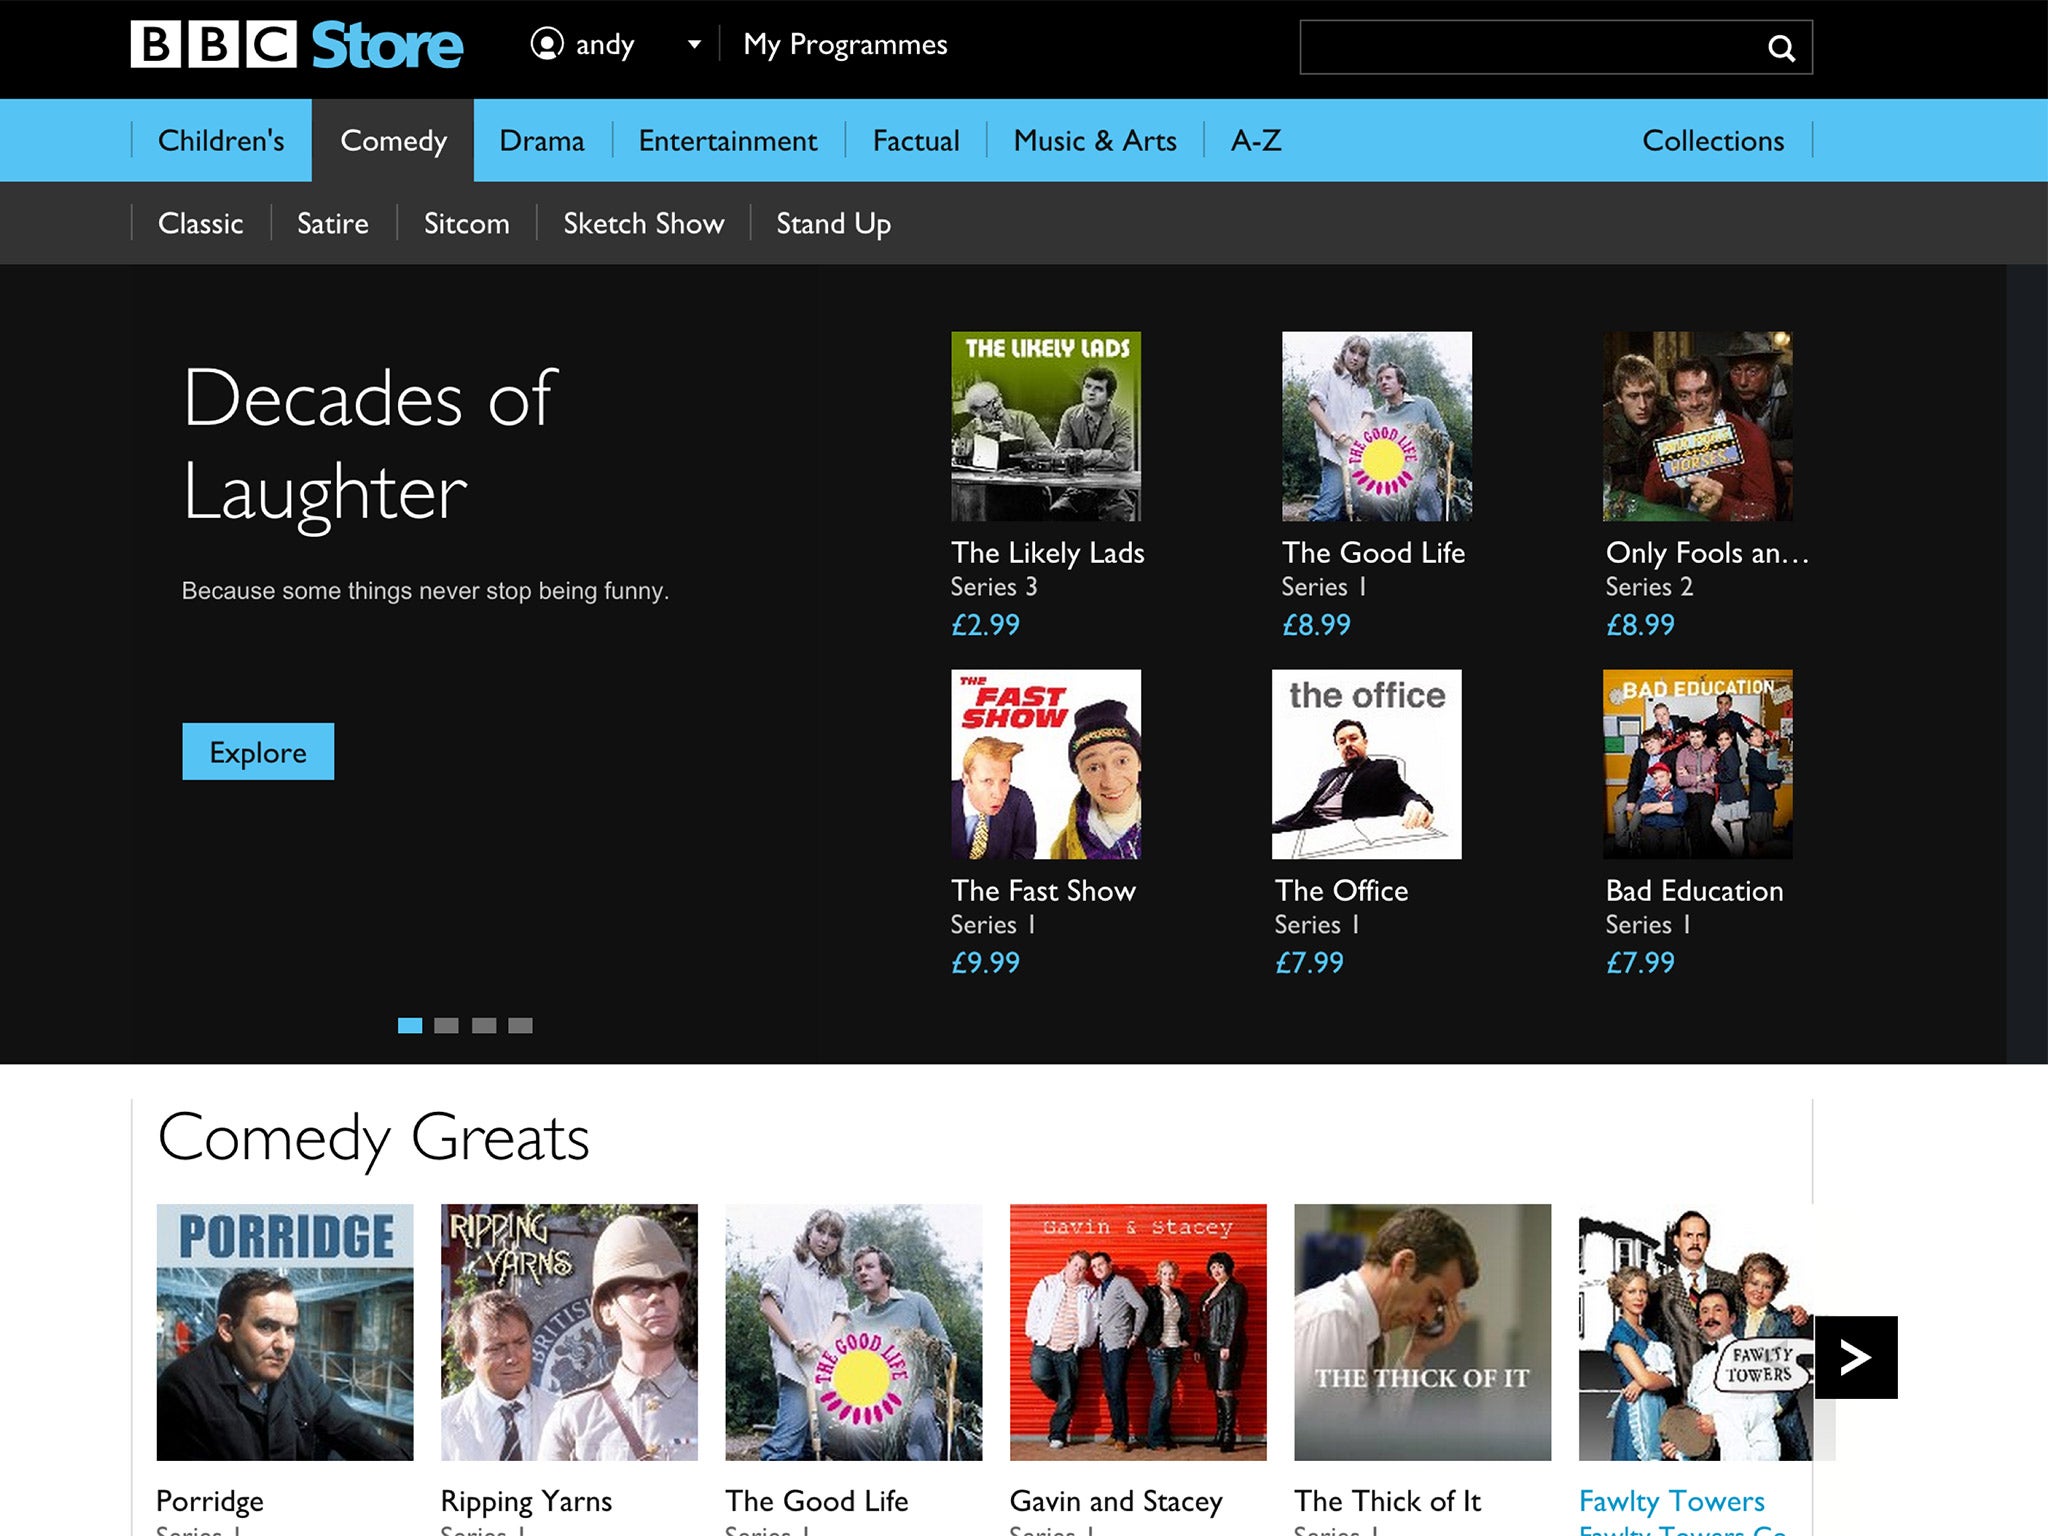 The BBC Store interface doesn't differ greatly from that of its iPlayer